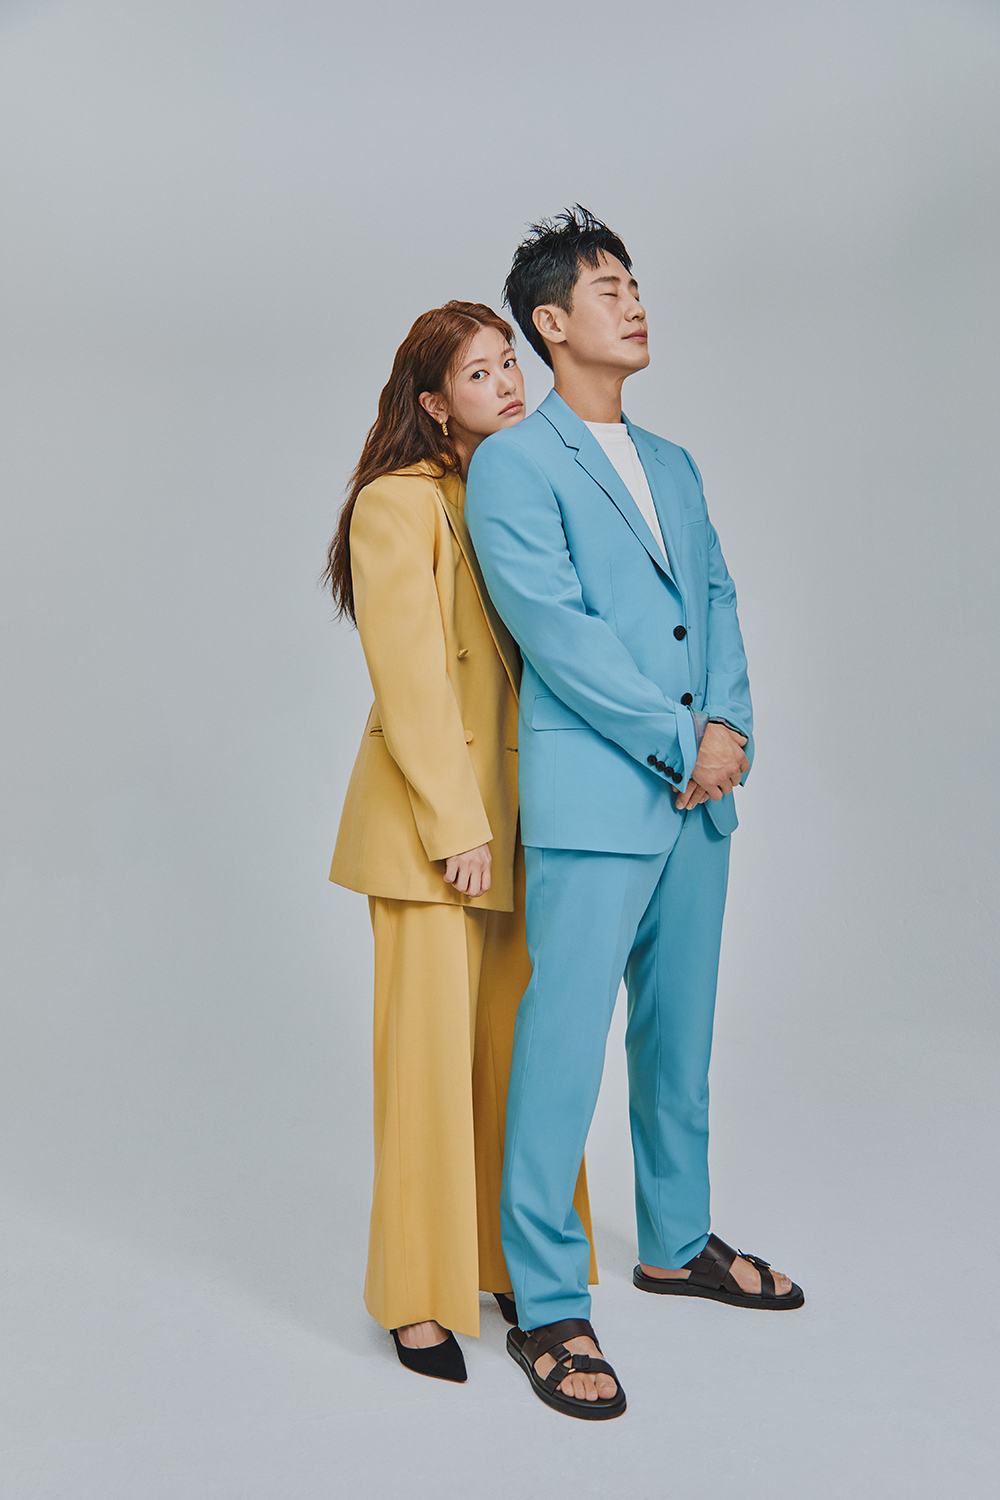 The mens fashion magazine Arena has released some of the pictures with Shin Ha-kyun & Jung So-min.This picture, which will be released in the June issue of Arena, shows the two people who made their first co-work in the drama KBS 2TV new tree drama Soul Repair.The two people who co-worked through the healing story surrounding the psychiatric department showed perfect co-work through the photo shoot with Arena, raising expectations for Drama.Soul repairman is a drama about the story of the musical Actor Han Woo-min, who has a pain in his mind, meeting a psychiatrist who does not care about the water for the healing of patients and healing the pain while meeting this level.Shin Ha-kyun of This Level Station and Jung So-min of Hanwoo Station gathered their mouths and expressed their desire to be a work that would help everyone not to be ashamed or difficult to heal the pain of their hearts.The two actors, who are loved by intense and immersive Acting, have raised their expectations by vividly conveying the pleasant atmosphere of the scene through an interview with Arena.More pictures and more details of the two actors fantastic co-works that attract expectations with only two cuts of couples released before the drama airing can be found on the June issue of Arena.Photo = Arena